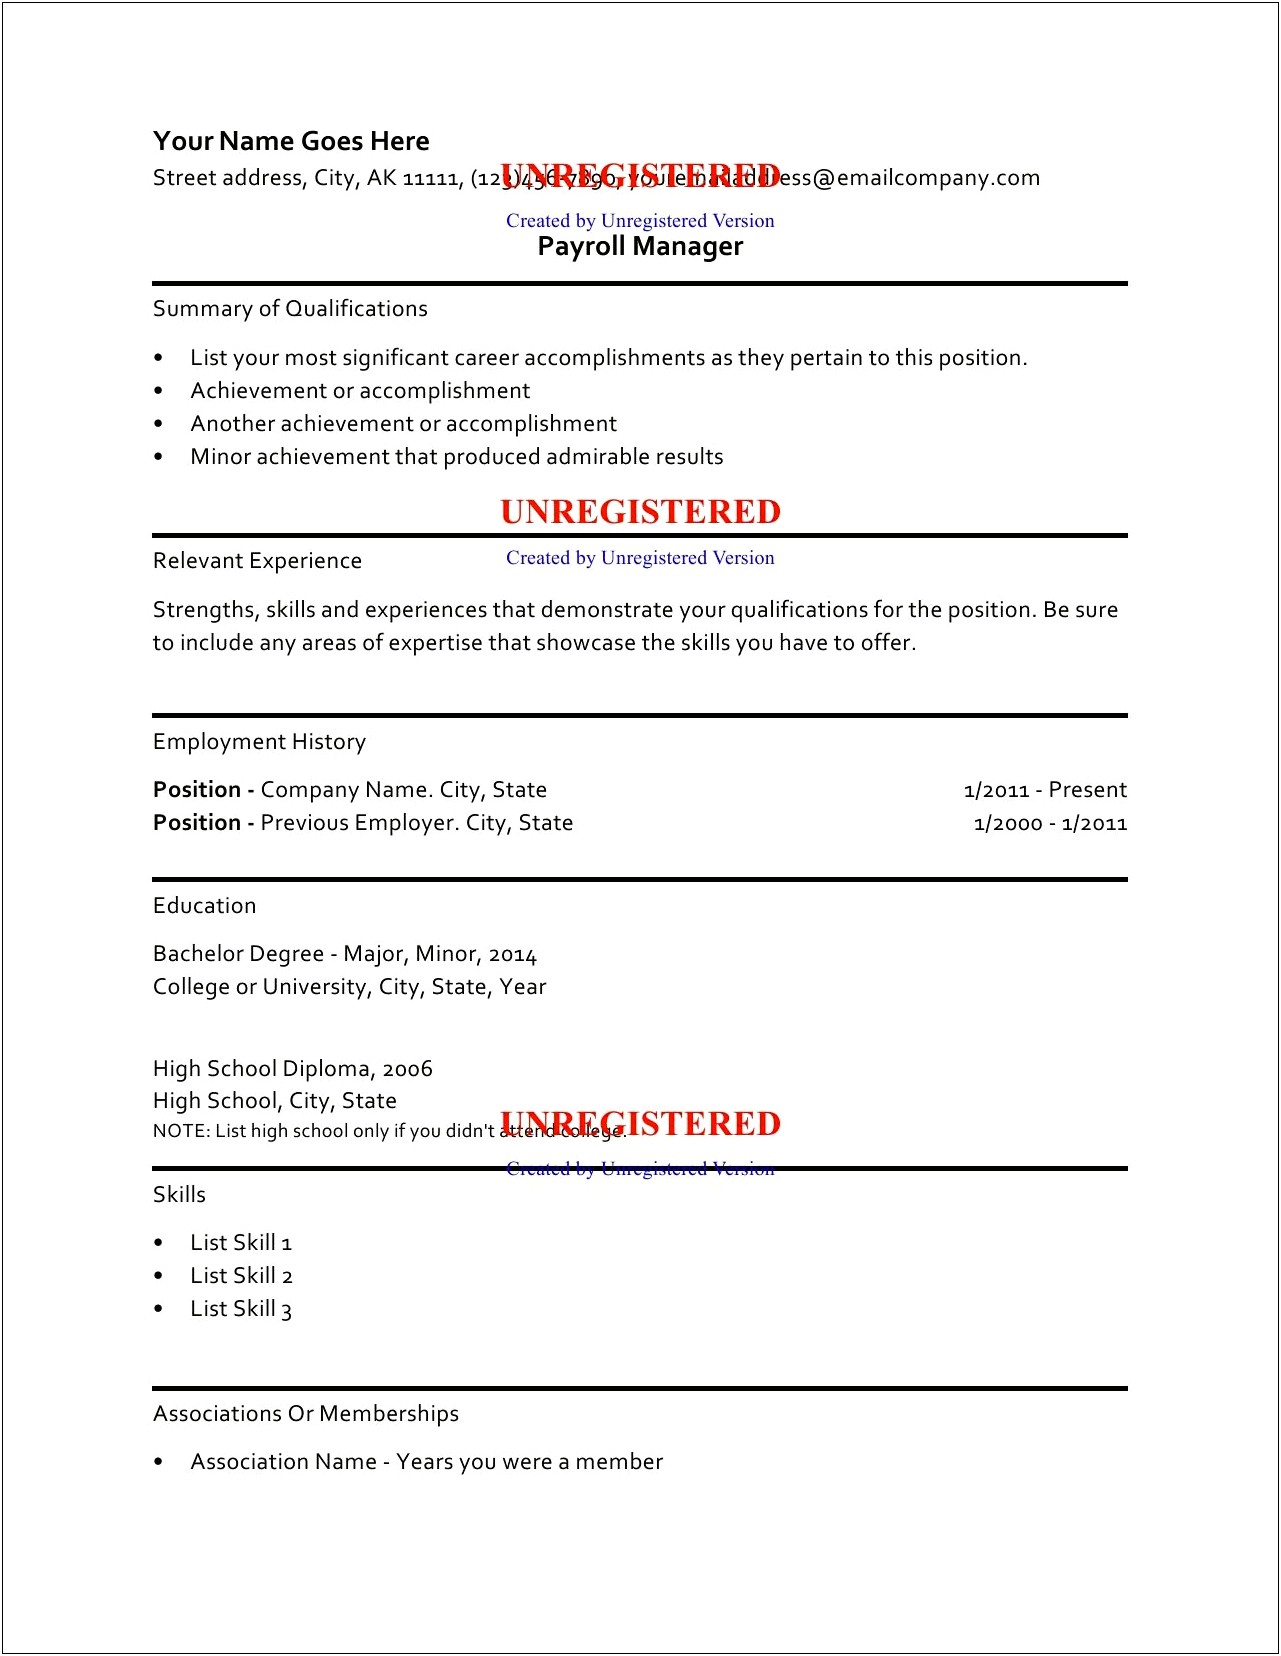 Resume Format For Payroll Manager